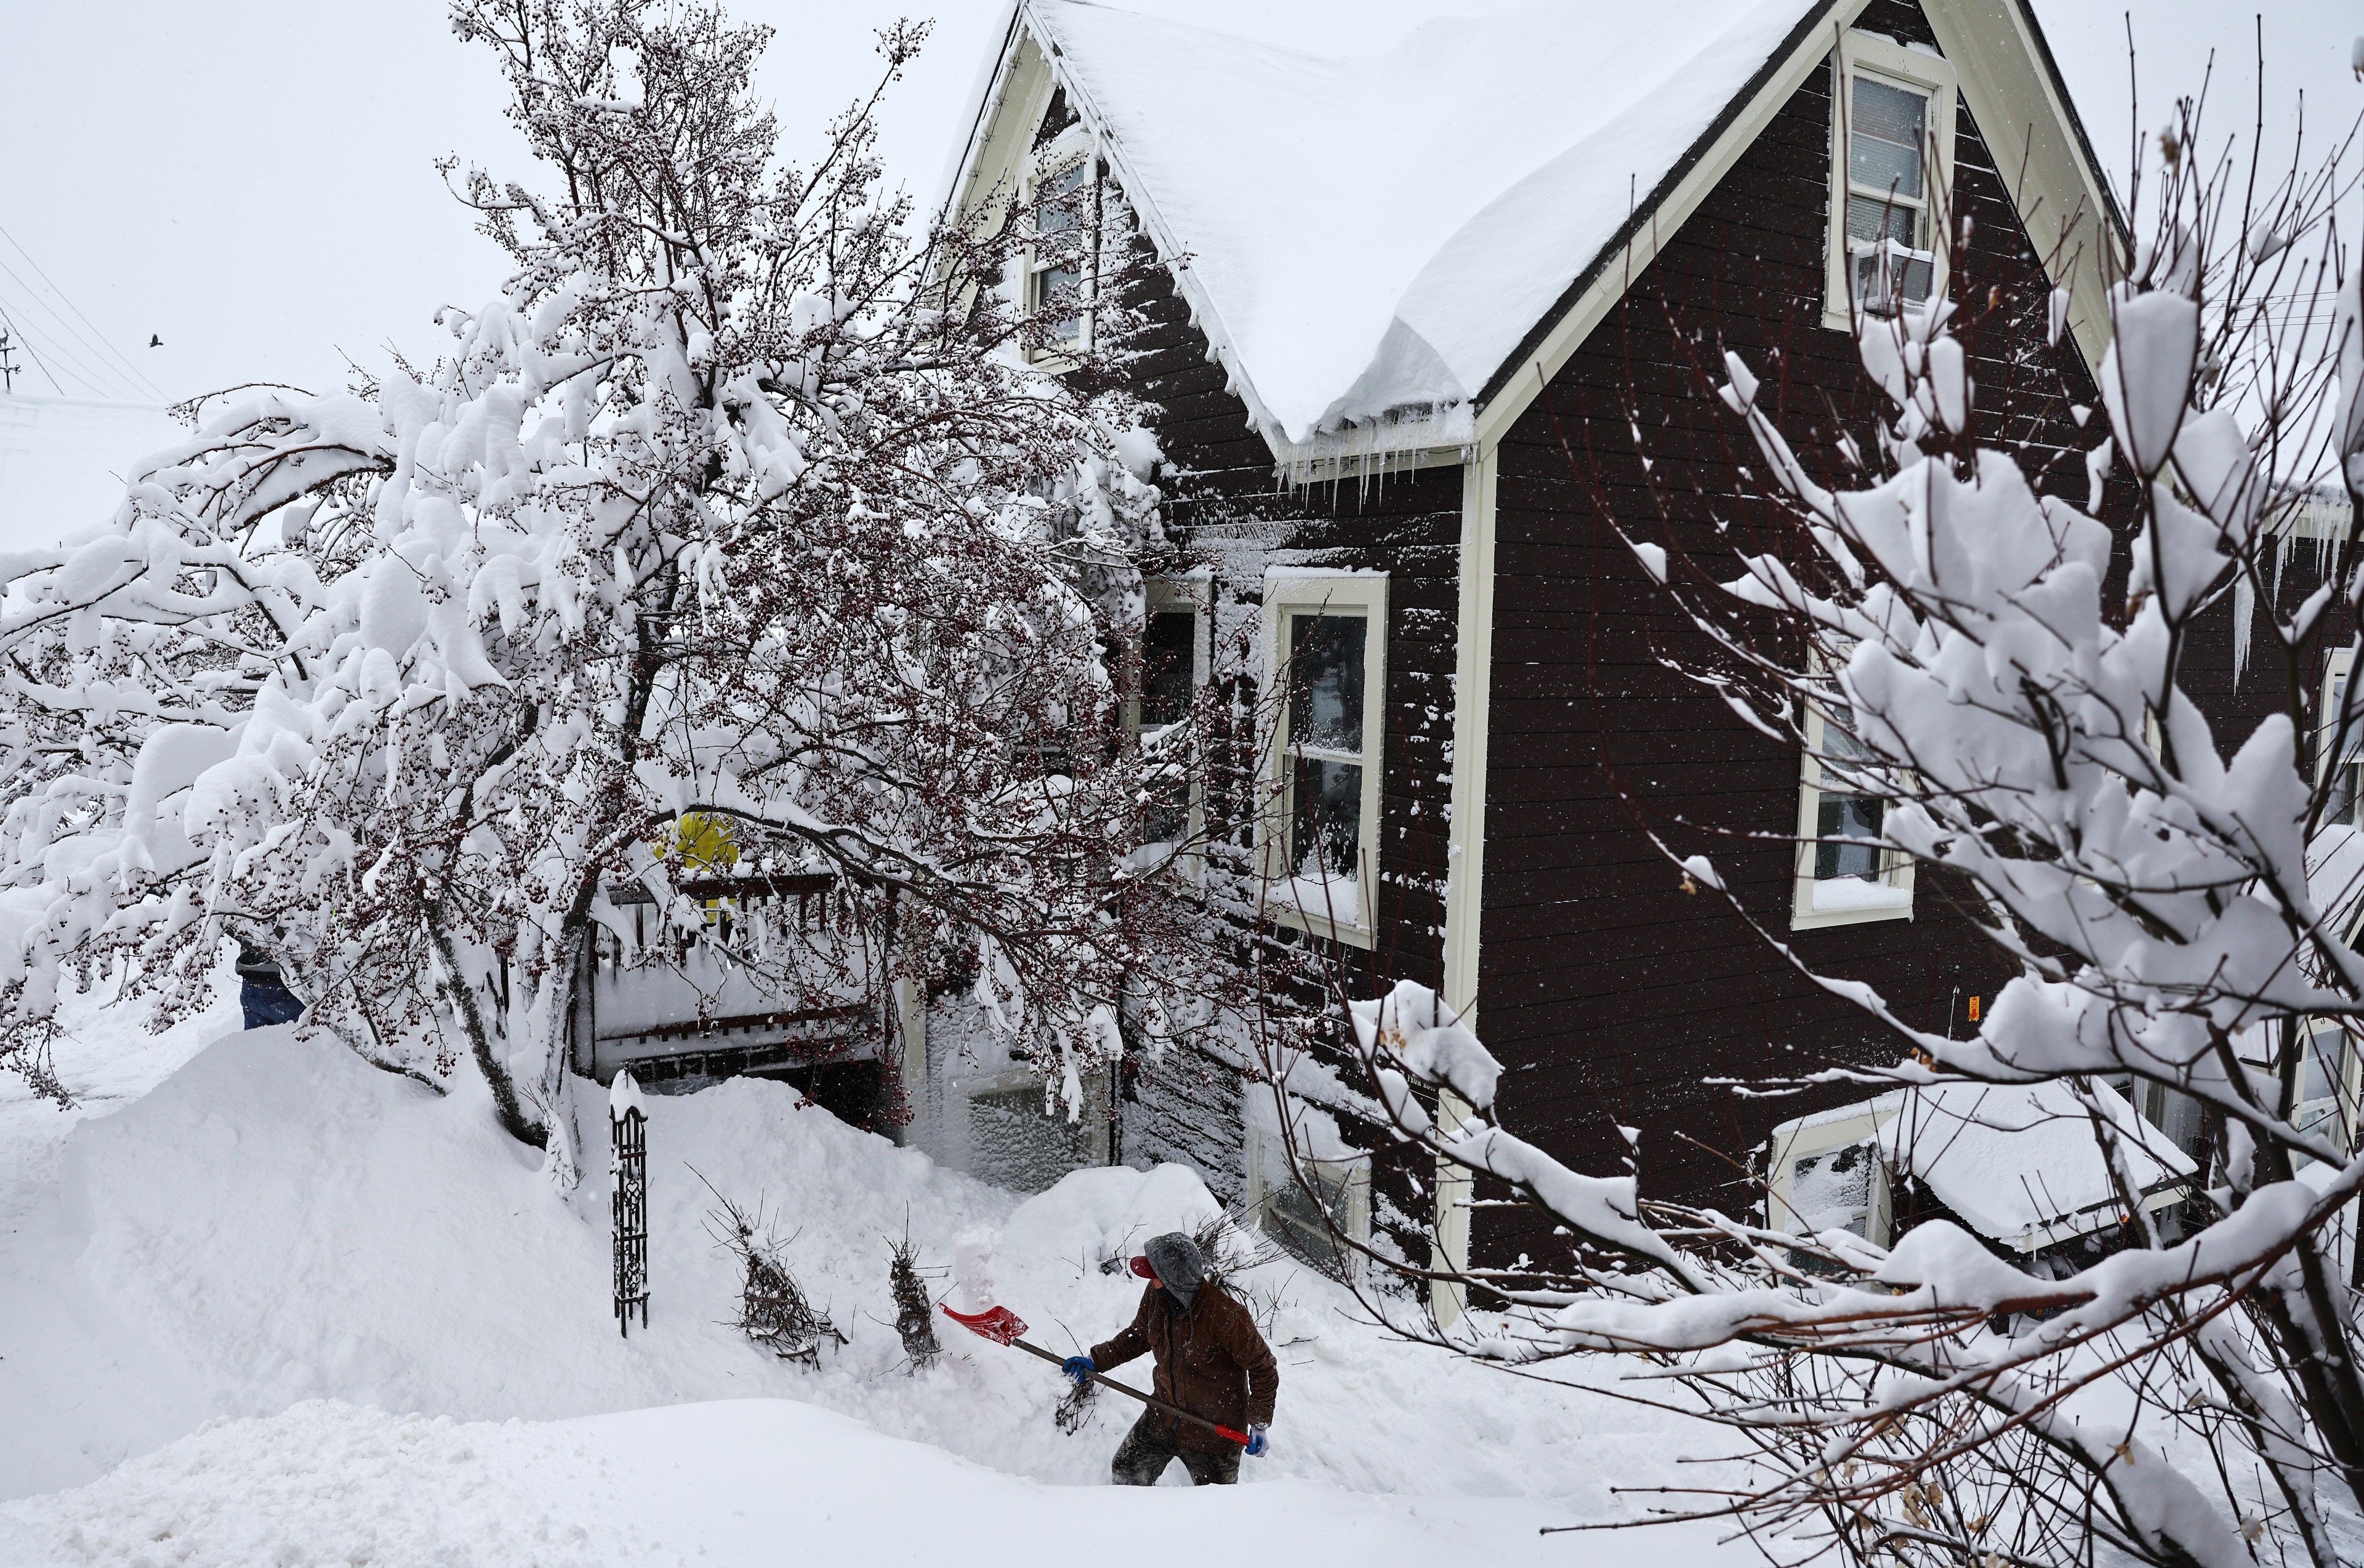 A worker digs through a pile of snow outside a snow covered building